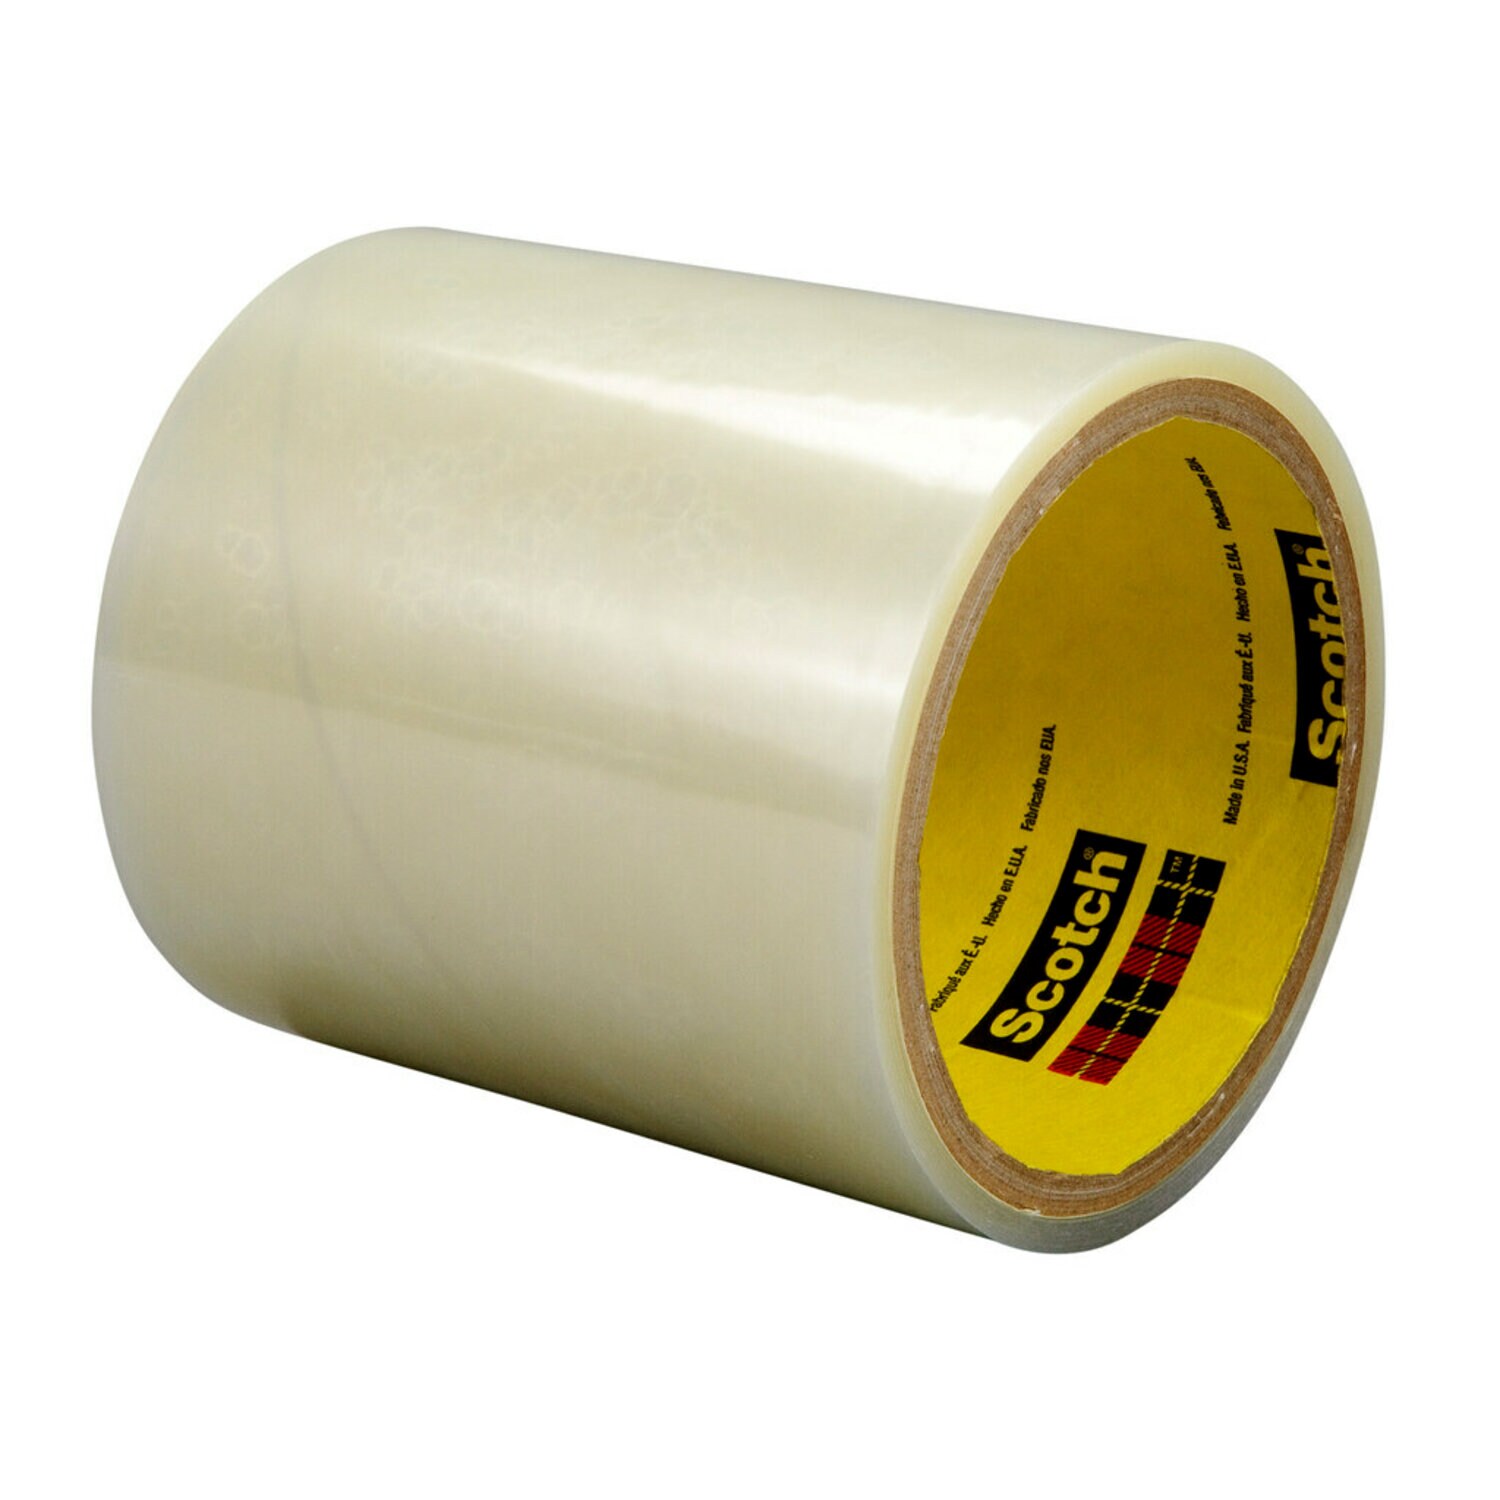 7100051378 - 3M Double Coated Tape 9628FL, Clear, 54 in x 360 yd, 2 mil, 1 roll per
case